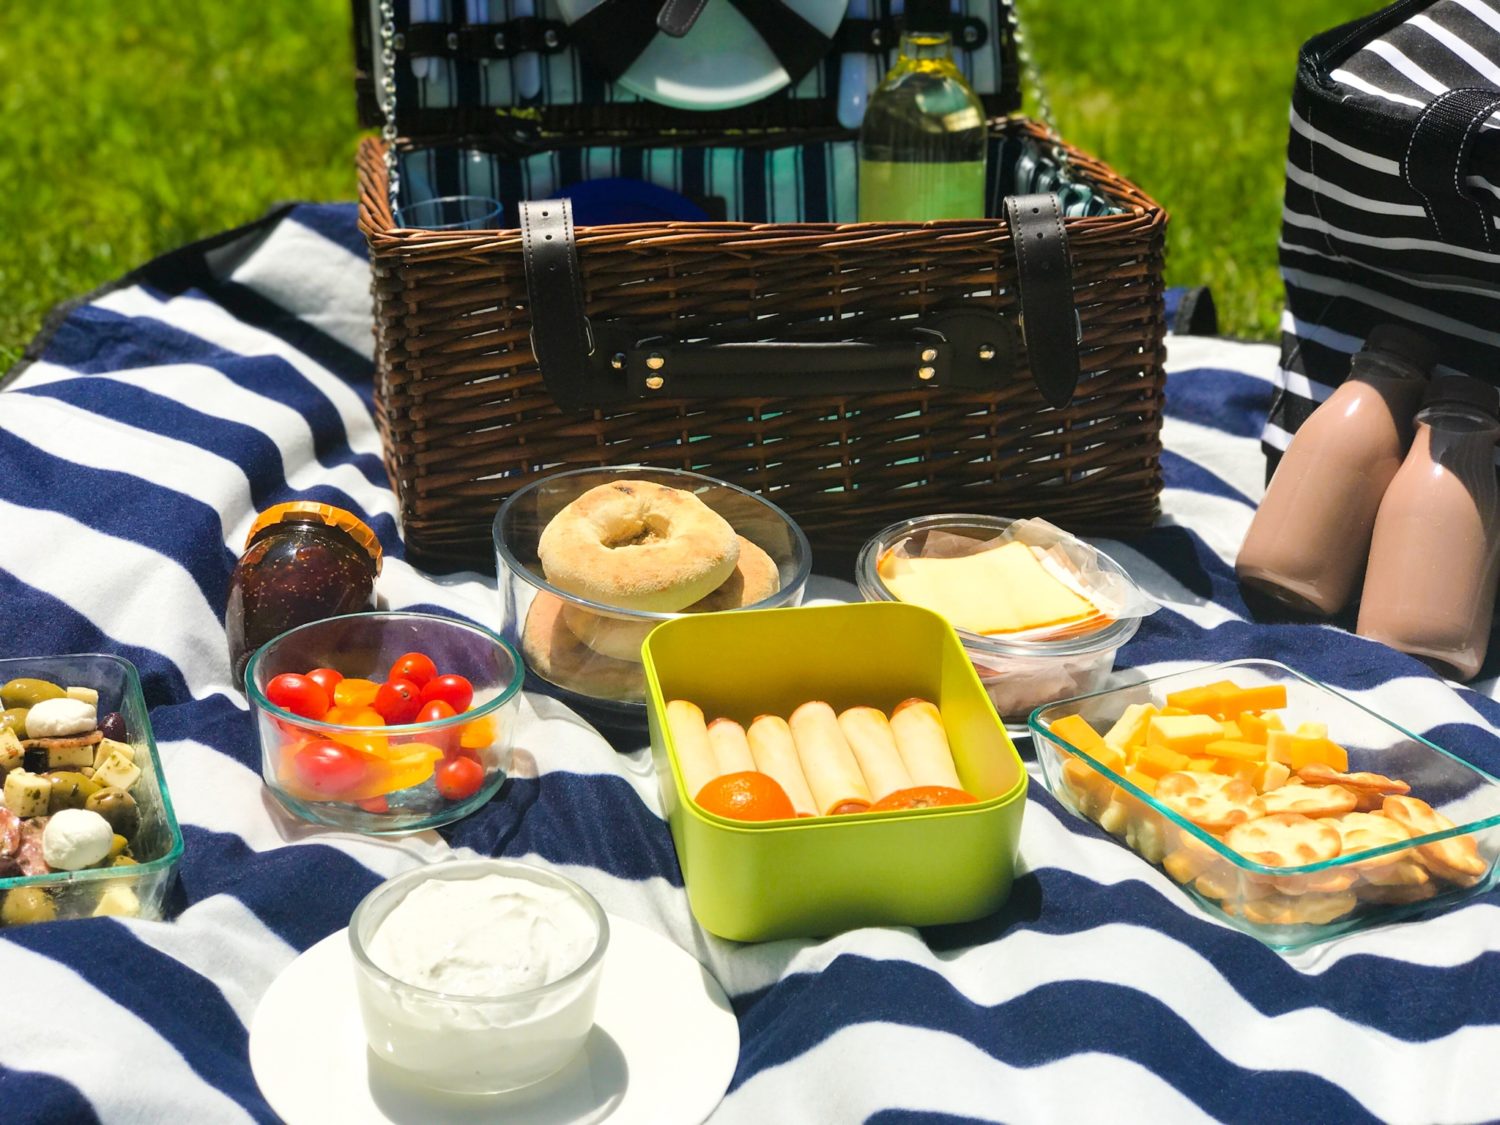 beautiful picnic spread on a striped blanket